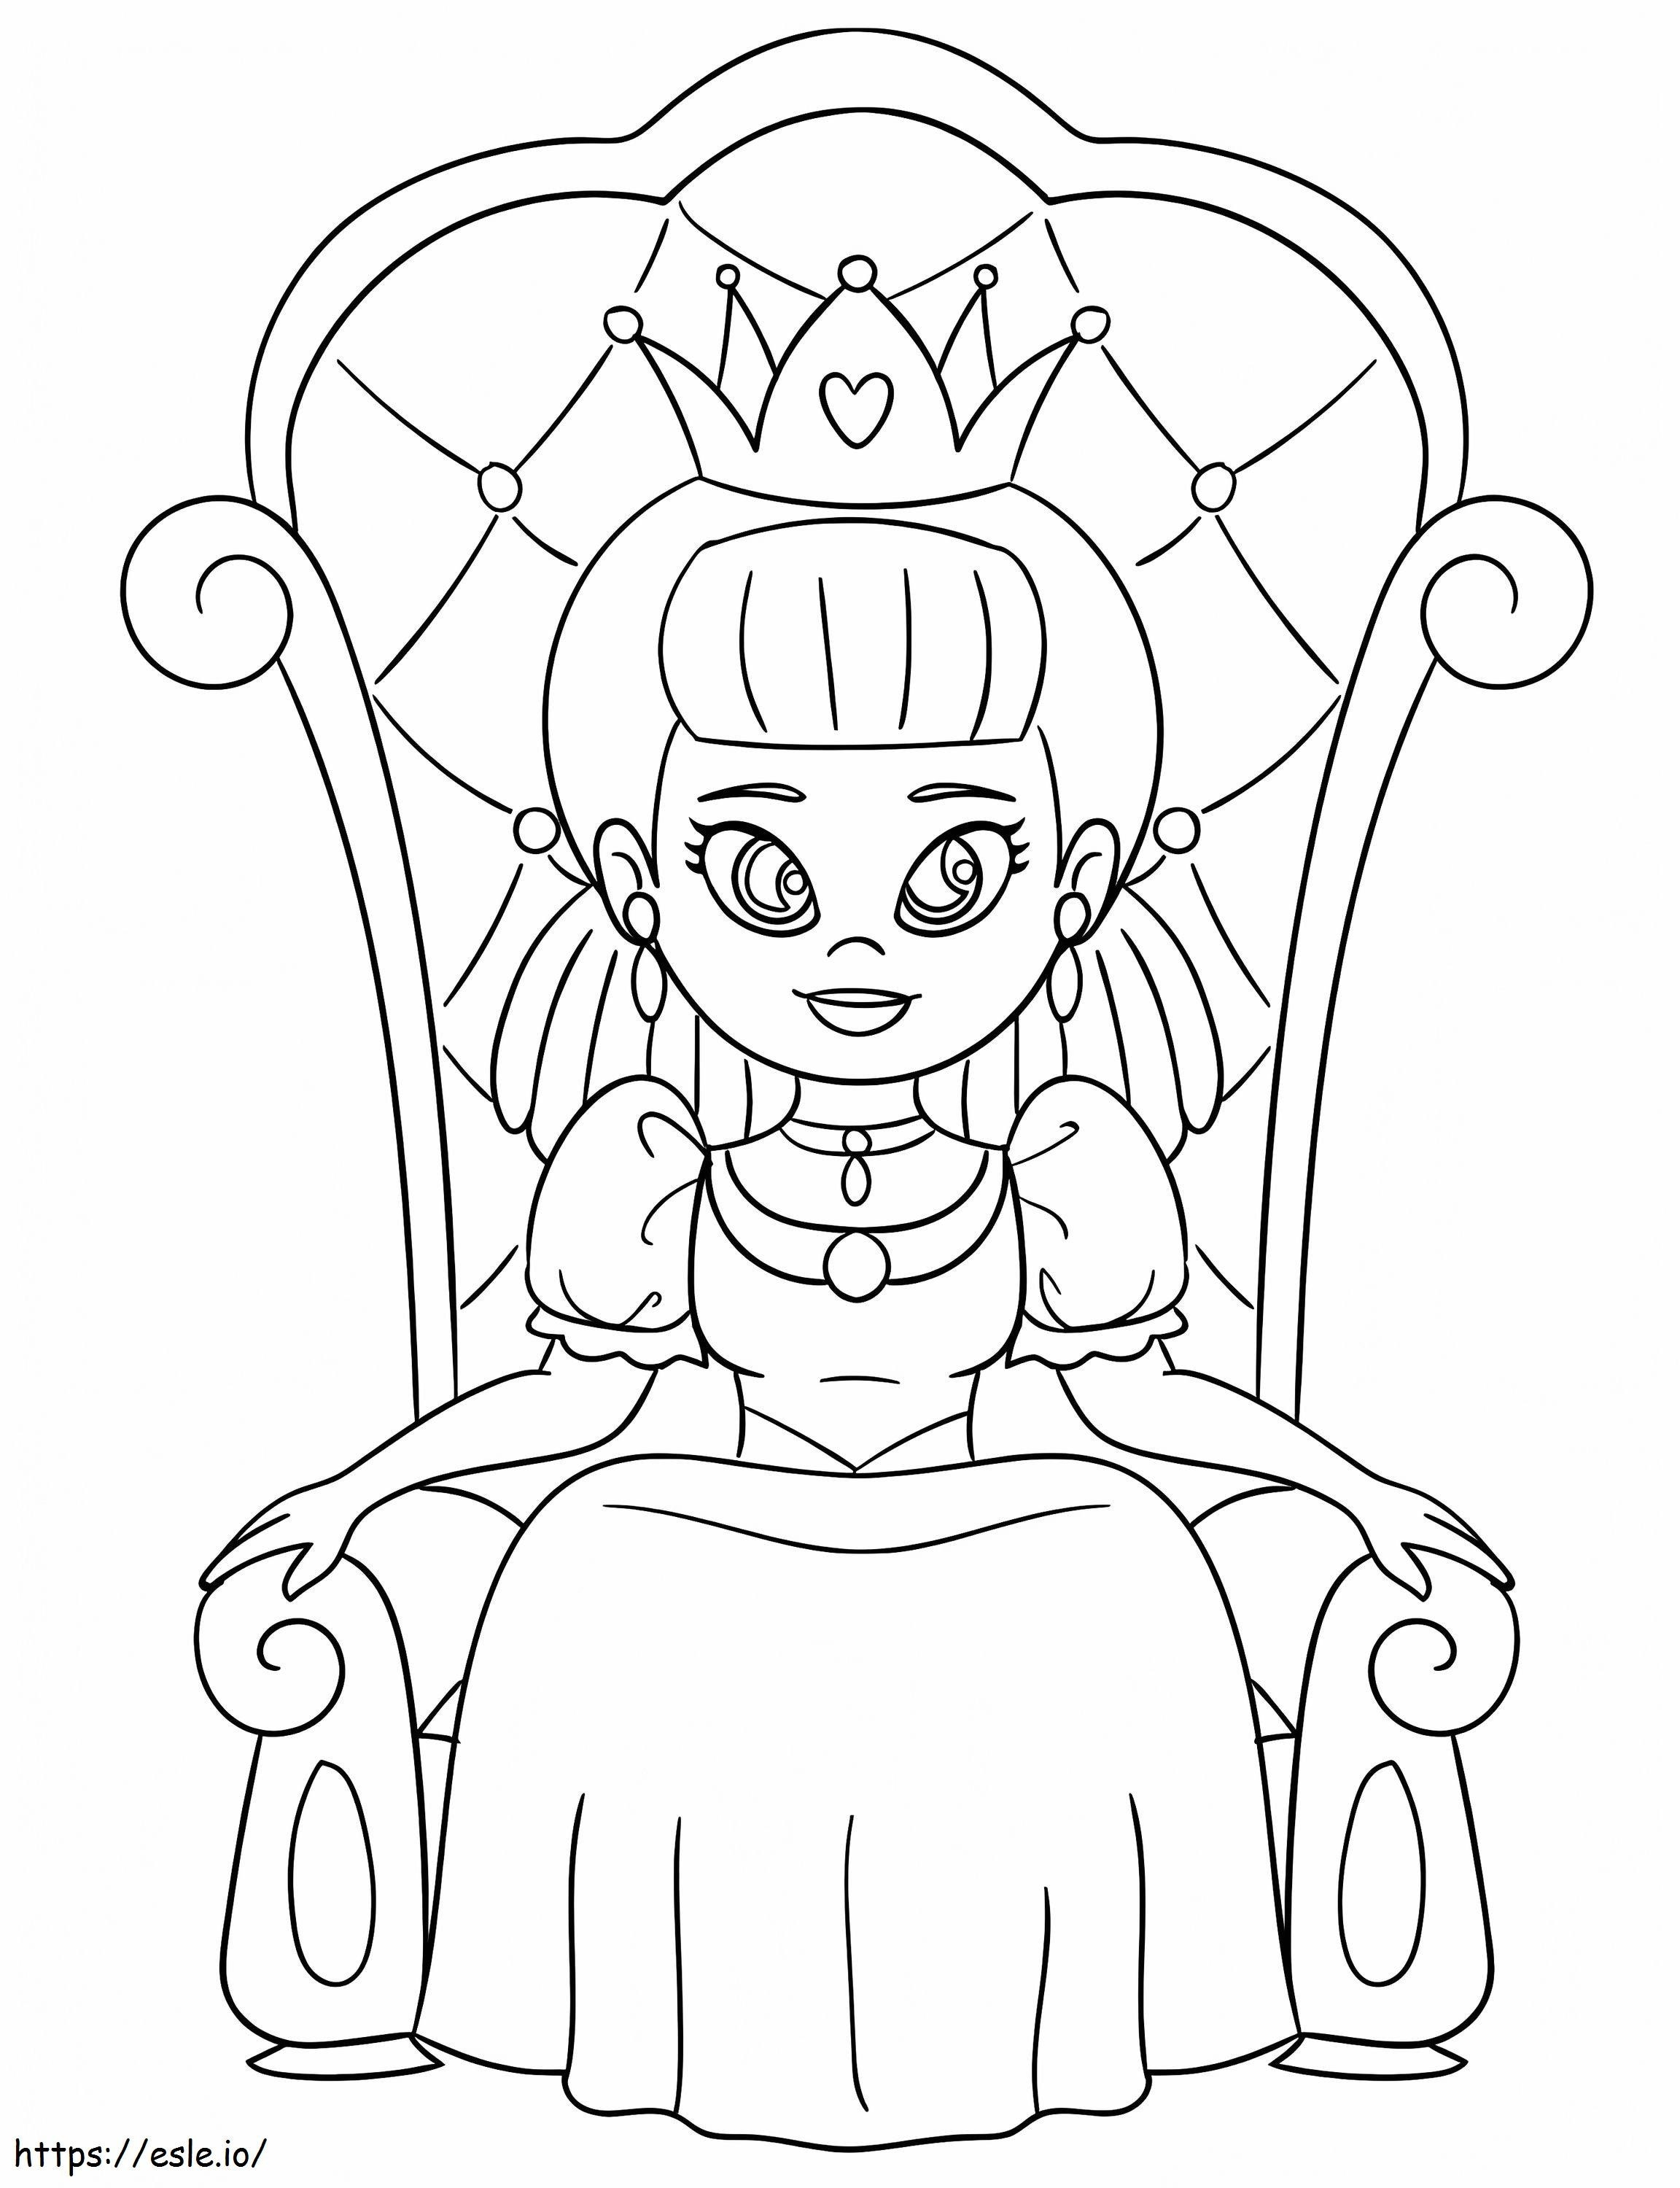 Queen On Throne coloring page